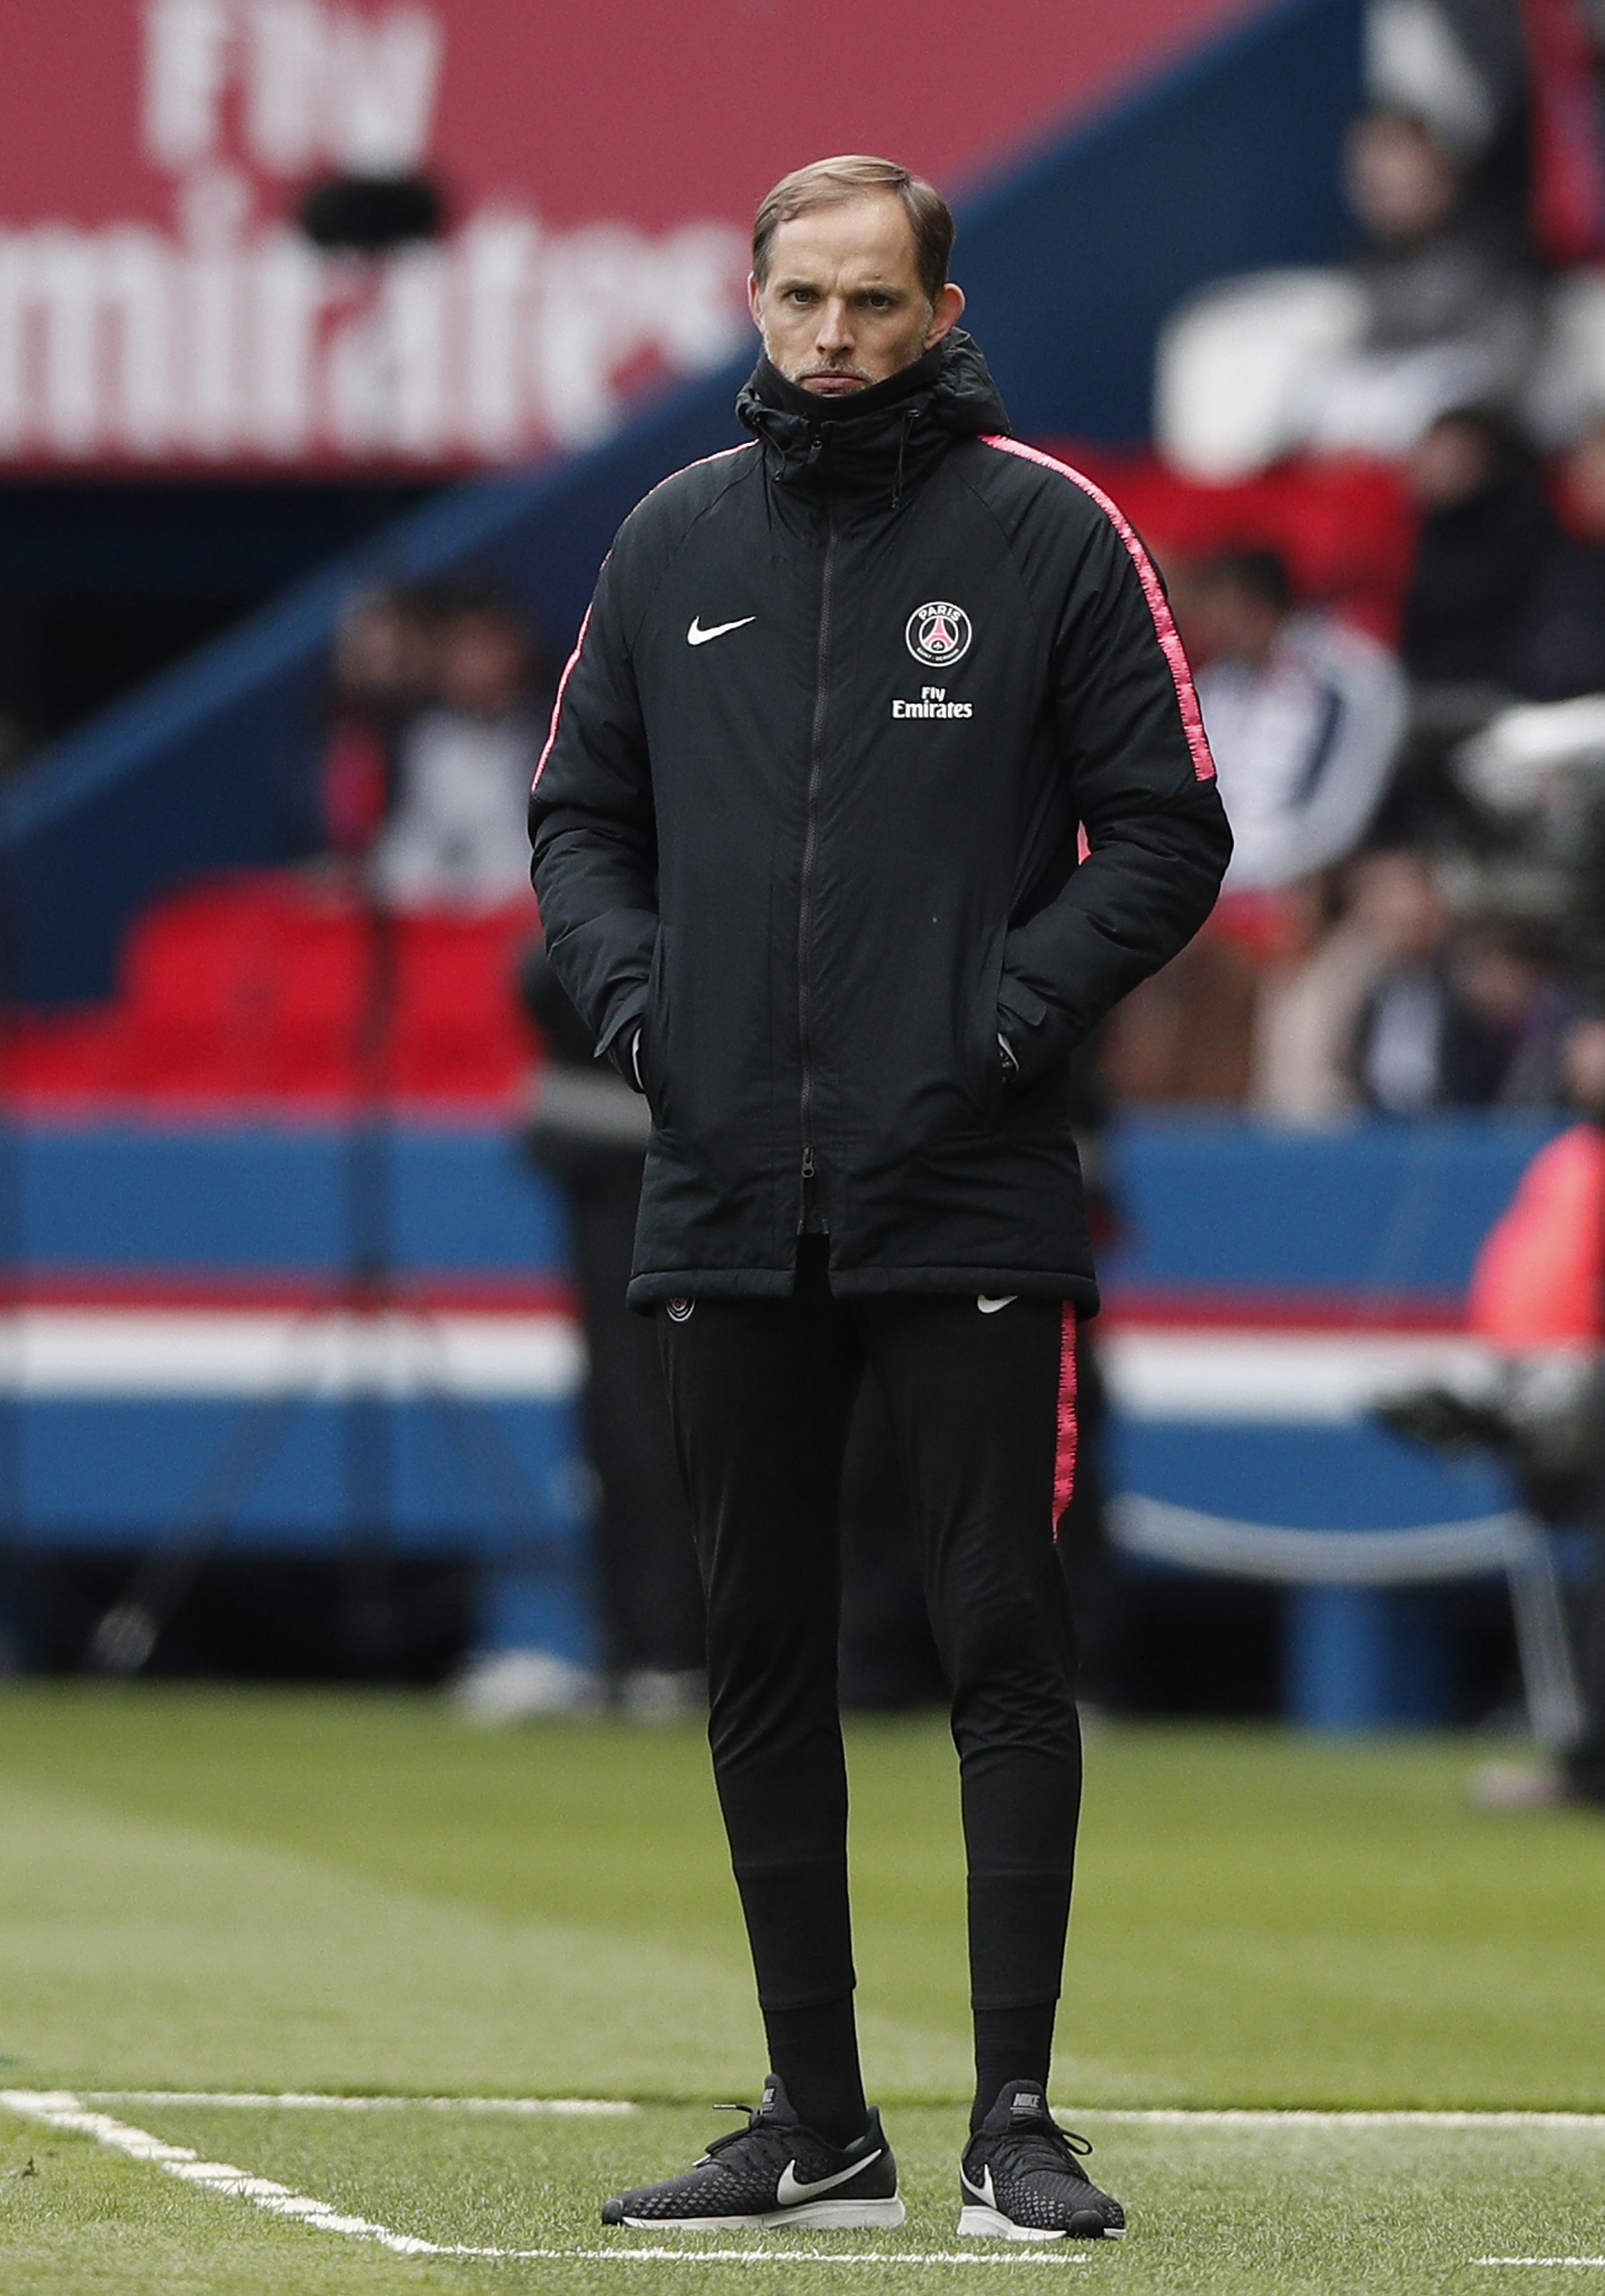 epa07547060 Paris Saint Germain head coach Thomas Tuchel looks on during the French Ligue 1 soccer match between PSG and Nice at the Parc des Princes stadium in Paris, France, 04 May 2019.  EPA/YOAN VALAT